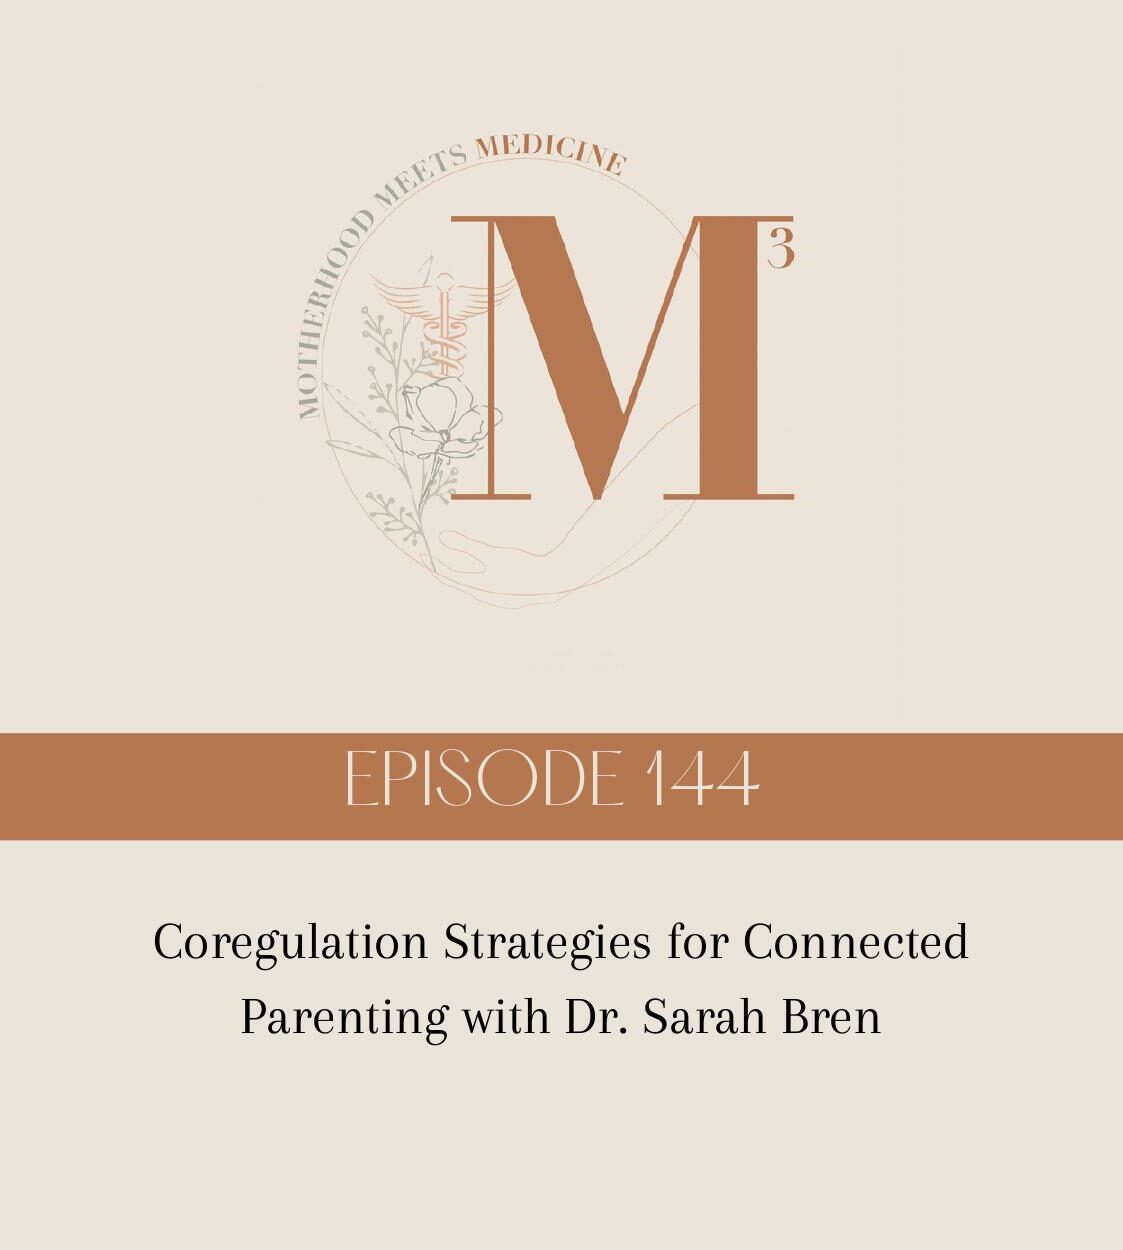 Episode 144: Coregulation Strategies for Connected Parenting with Dr. Sarah Bren